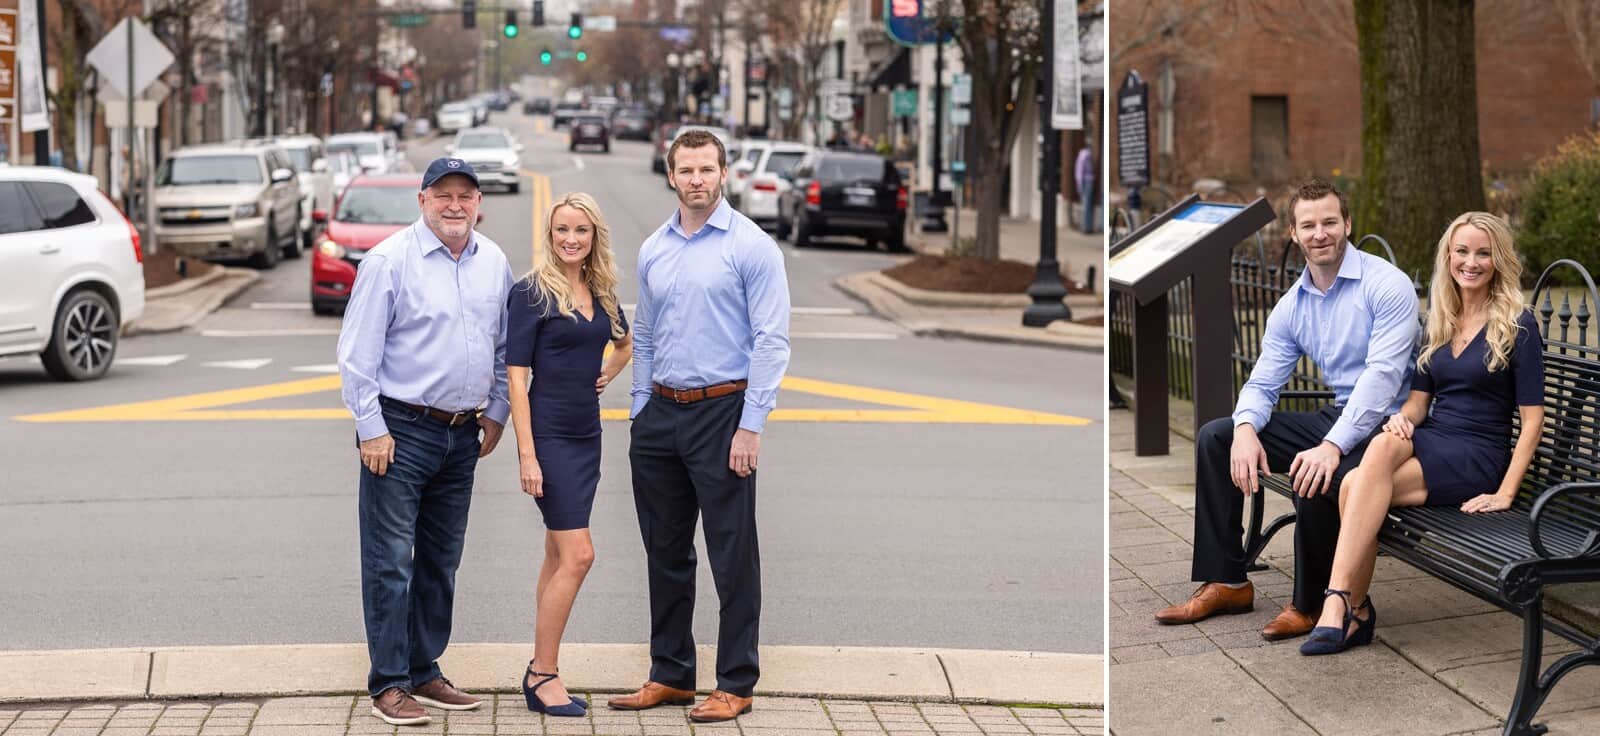 two men and one woman pose with small town street behind them